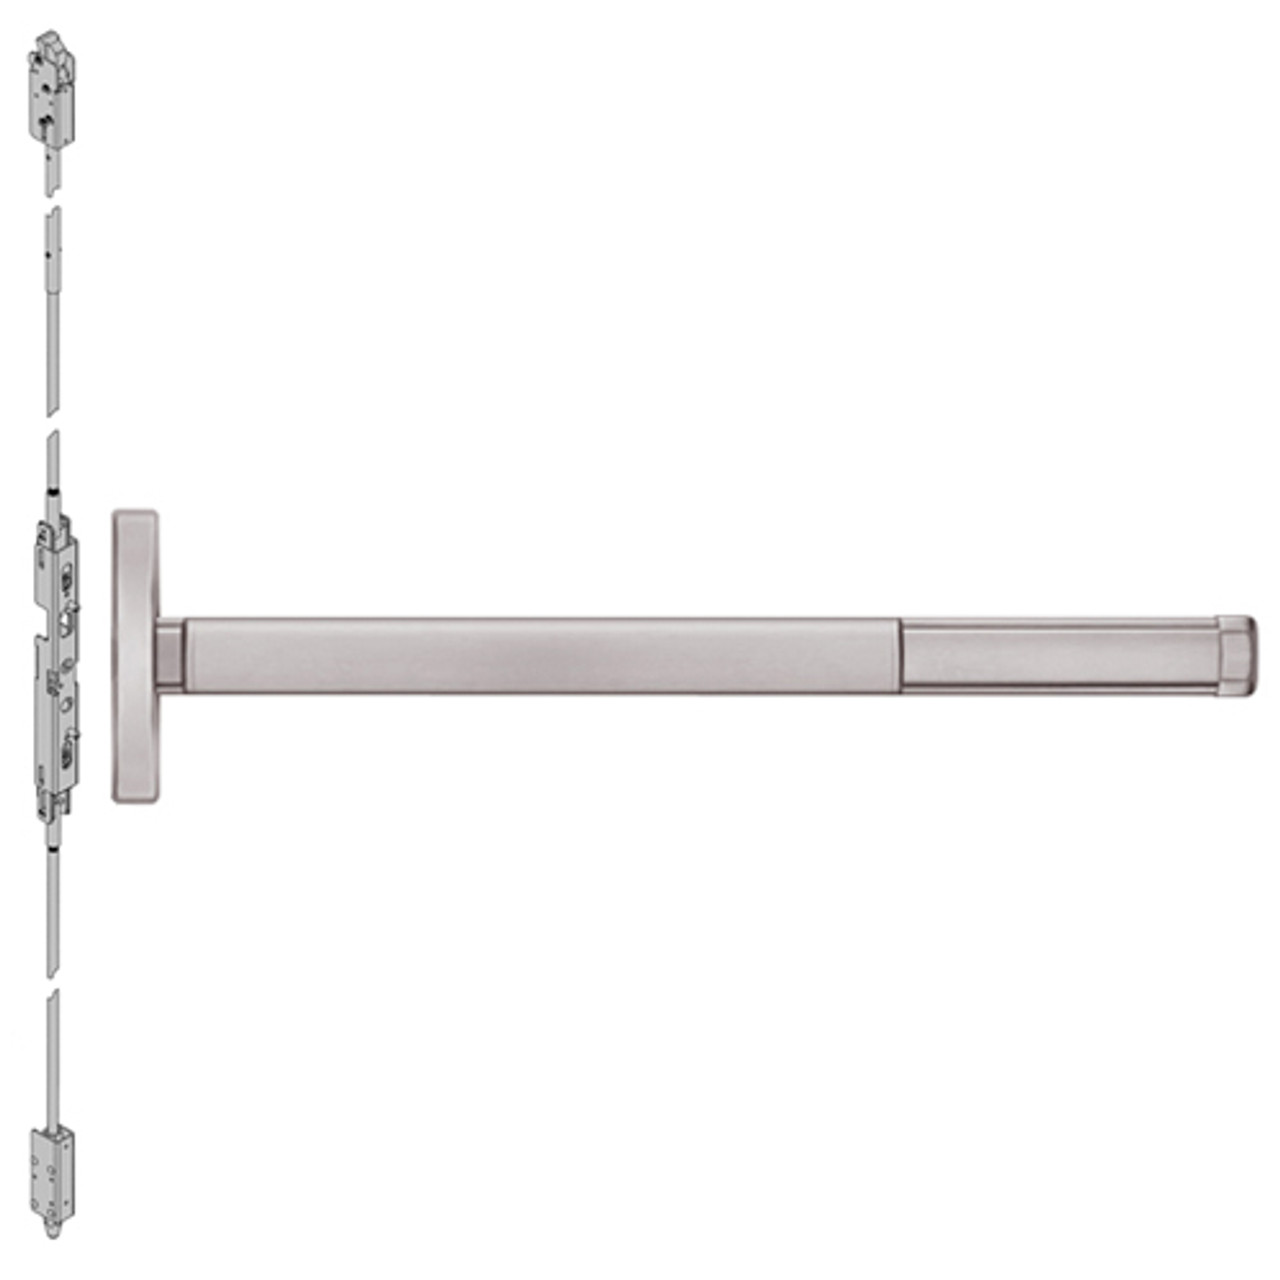 DE2602LBR-628-48 PHI 2600 Series Concealed Vertical Rod Exit Device with Delayed Egress Prepped for Dummy Trim in Satin Aluminum Finish